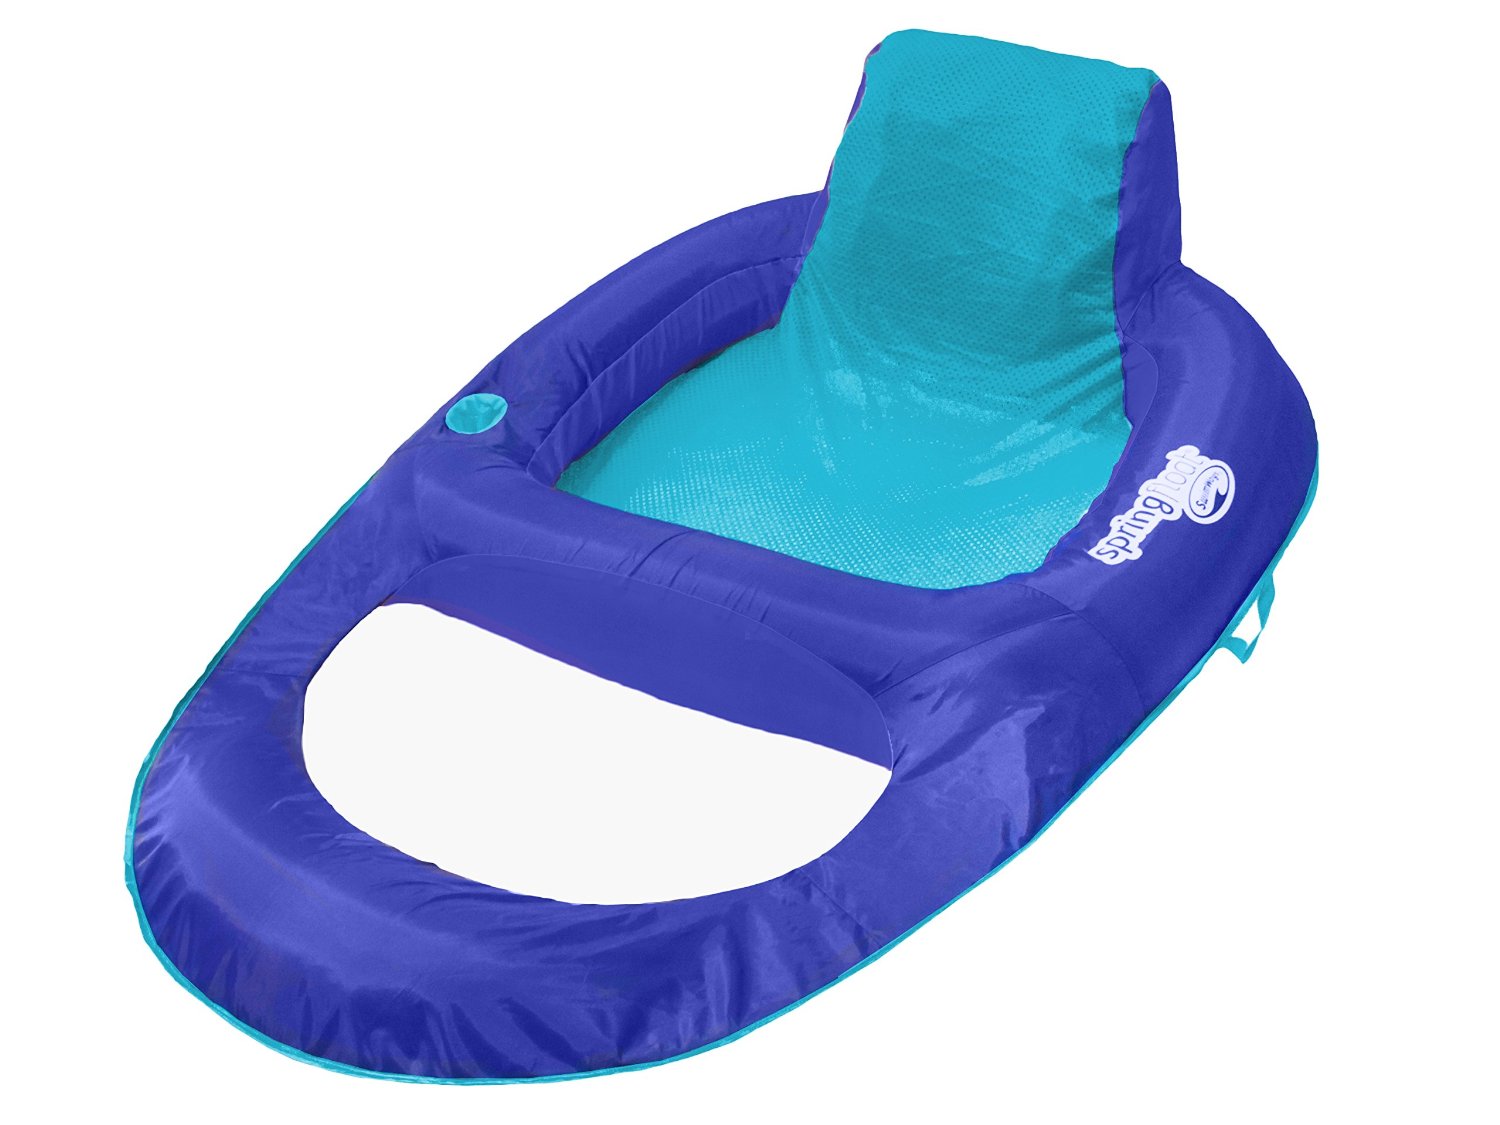 Top 10 Best Swimming Pool Loungers